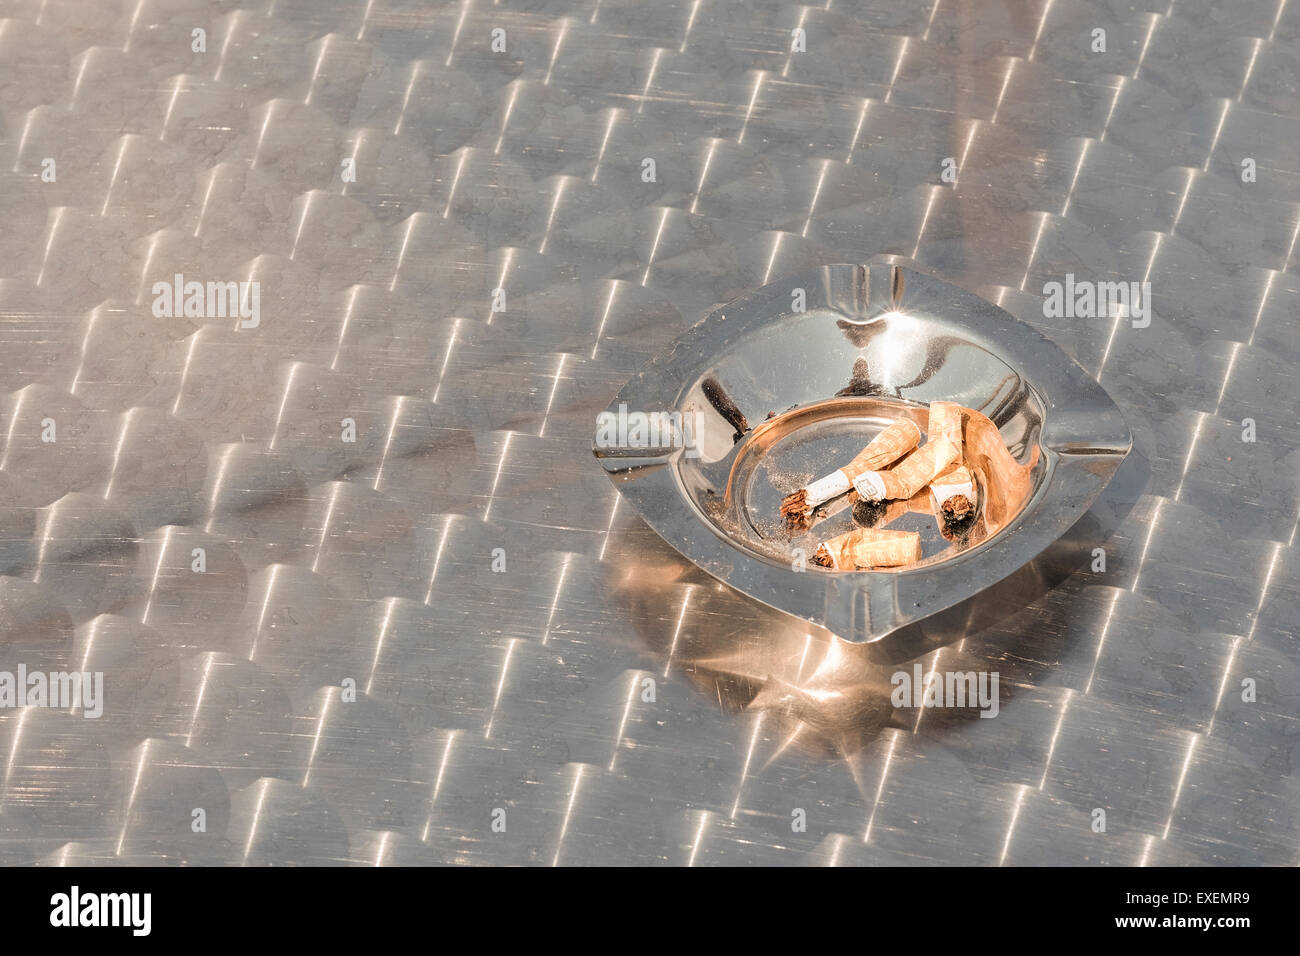 Stubbed out cigarette ends filters cigarettes in a stainless steel ashtray outdoors on a metal table. Smoking concept conceptual Stock Photo